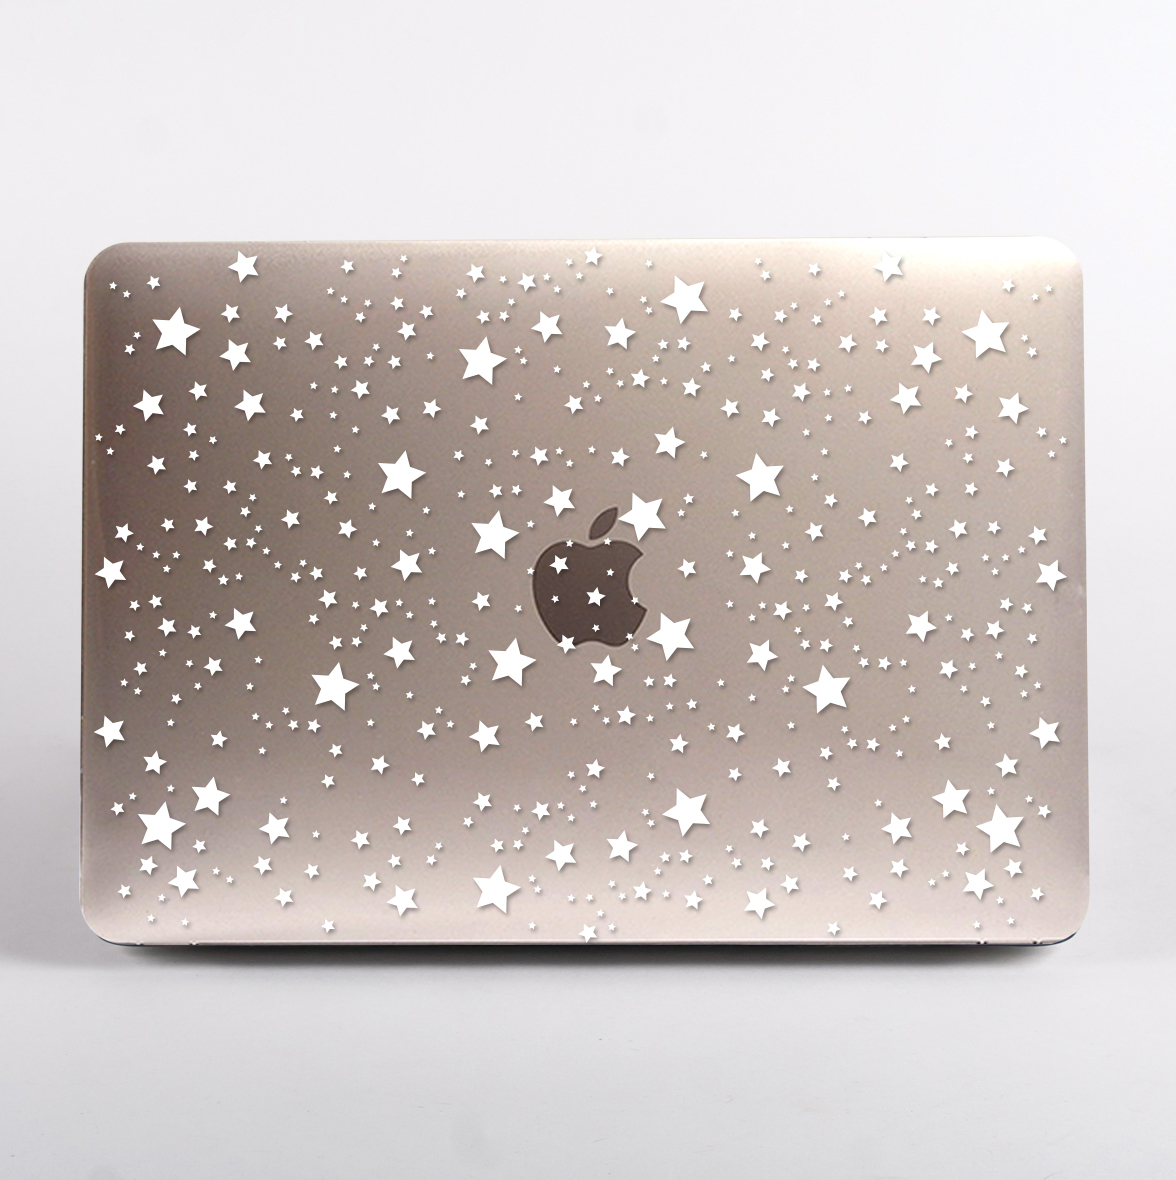 MacBook 13 Inch Case Cat Paw Lovely Pet Run Jump Footprint Plastic Hard Shell Compatible Mac Air 11 Pro 13 15 MacBook Air Protective Cover Protection for MacBook 2016-2019 Version